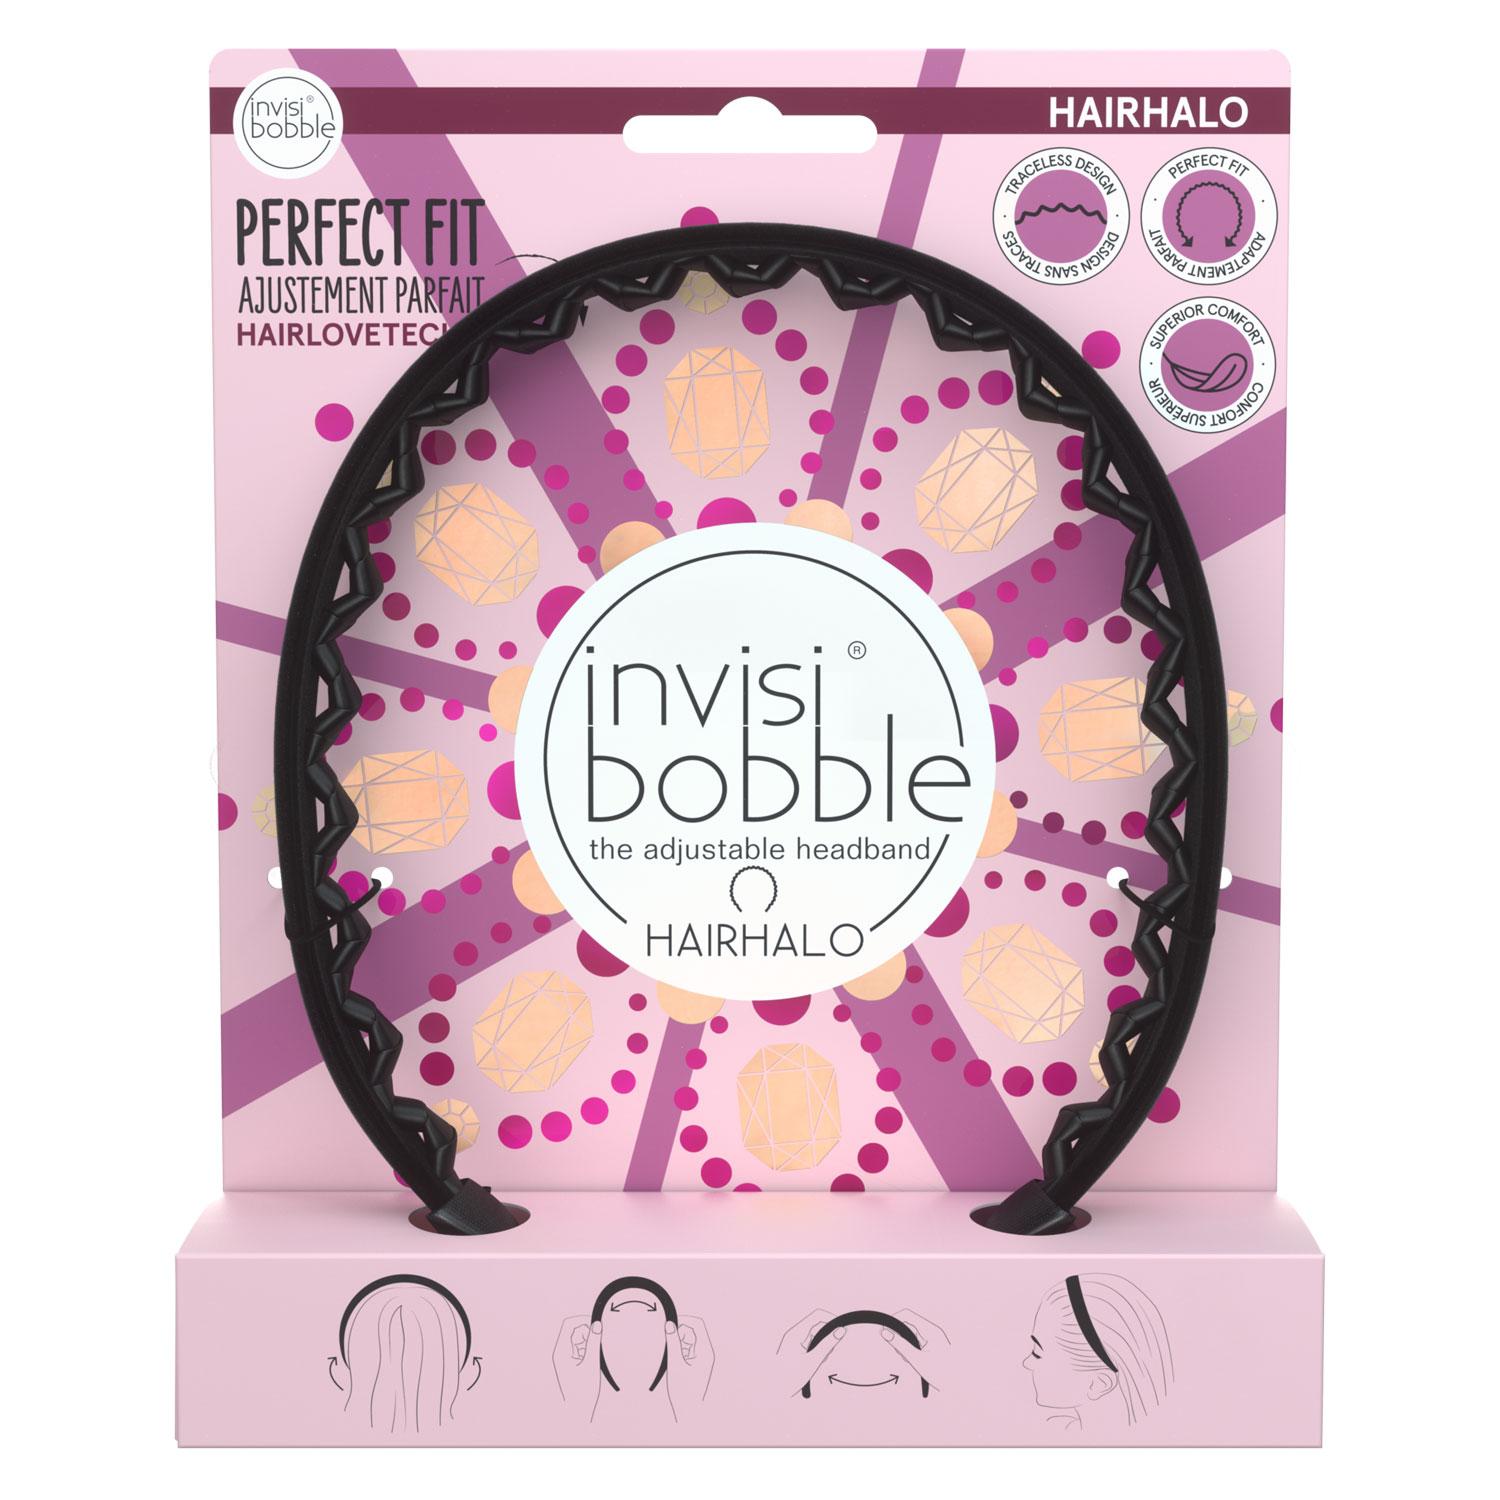 invisibobble HAIRHALO - British Royal Crown and Glory